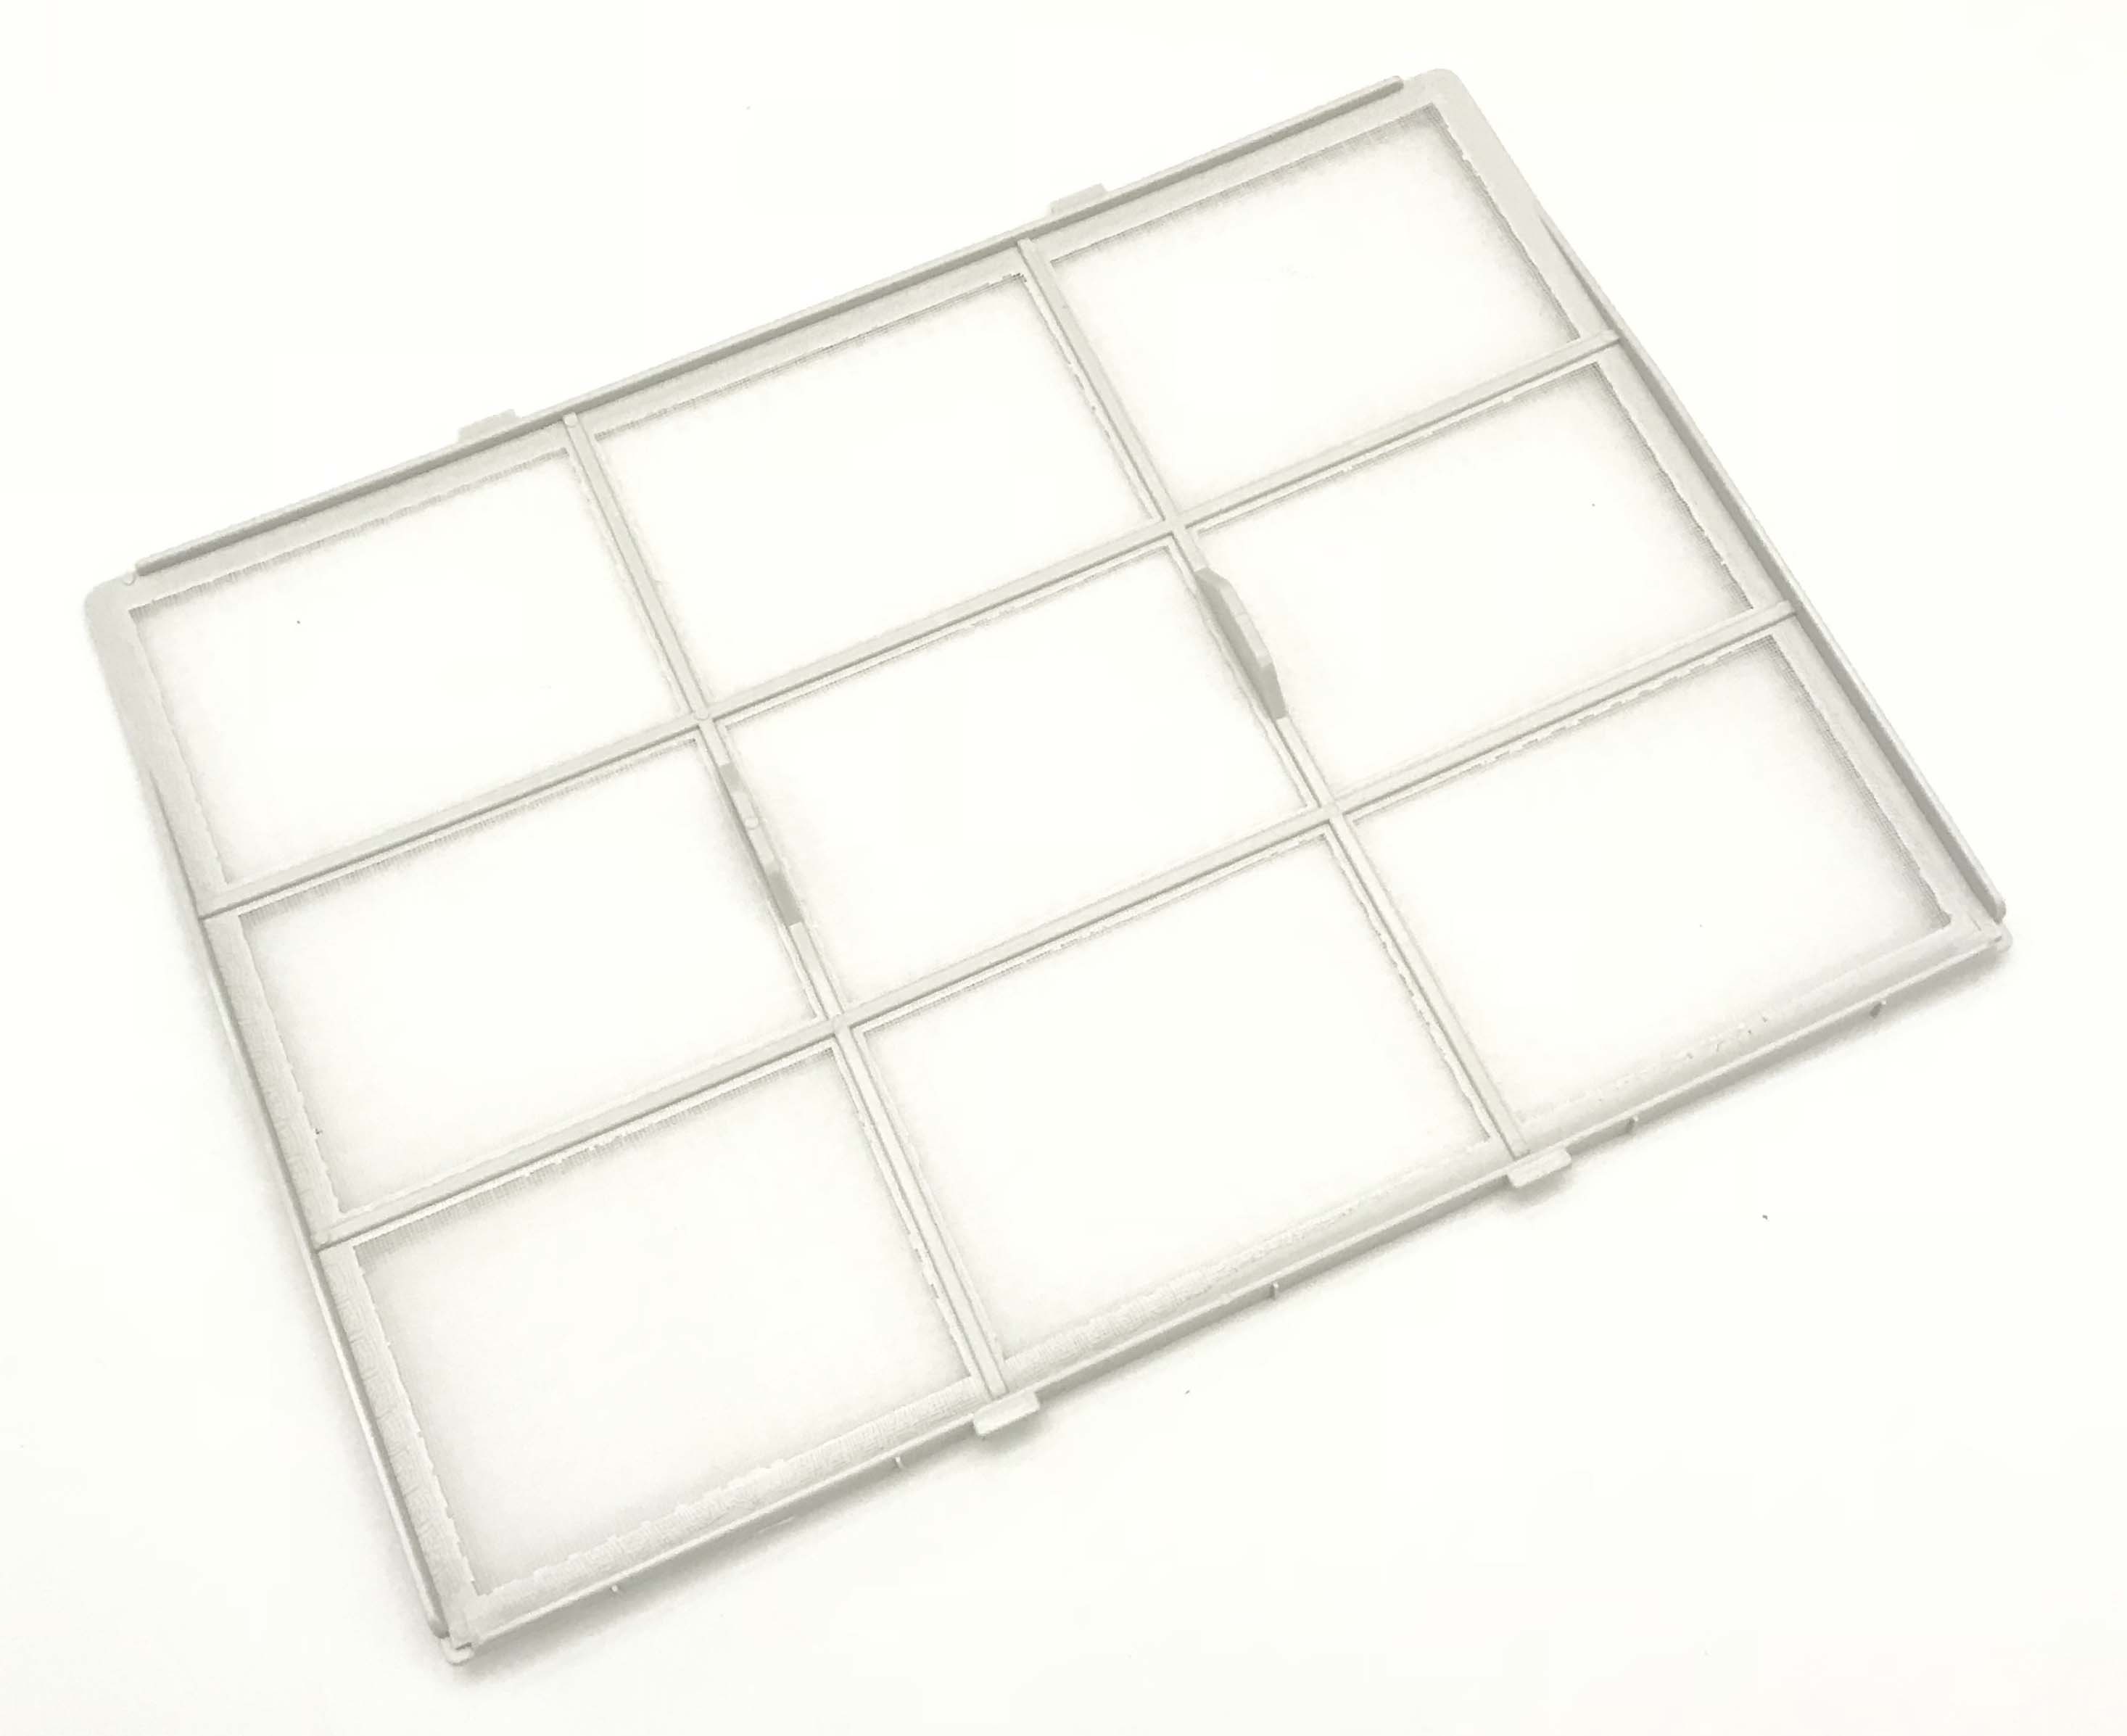 NEW OEM Delonghi AC Air Conditioner Filter Shipped With PACAN140HPEWKC3A